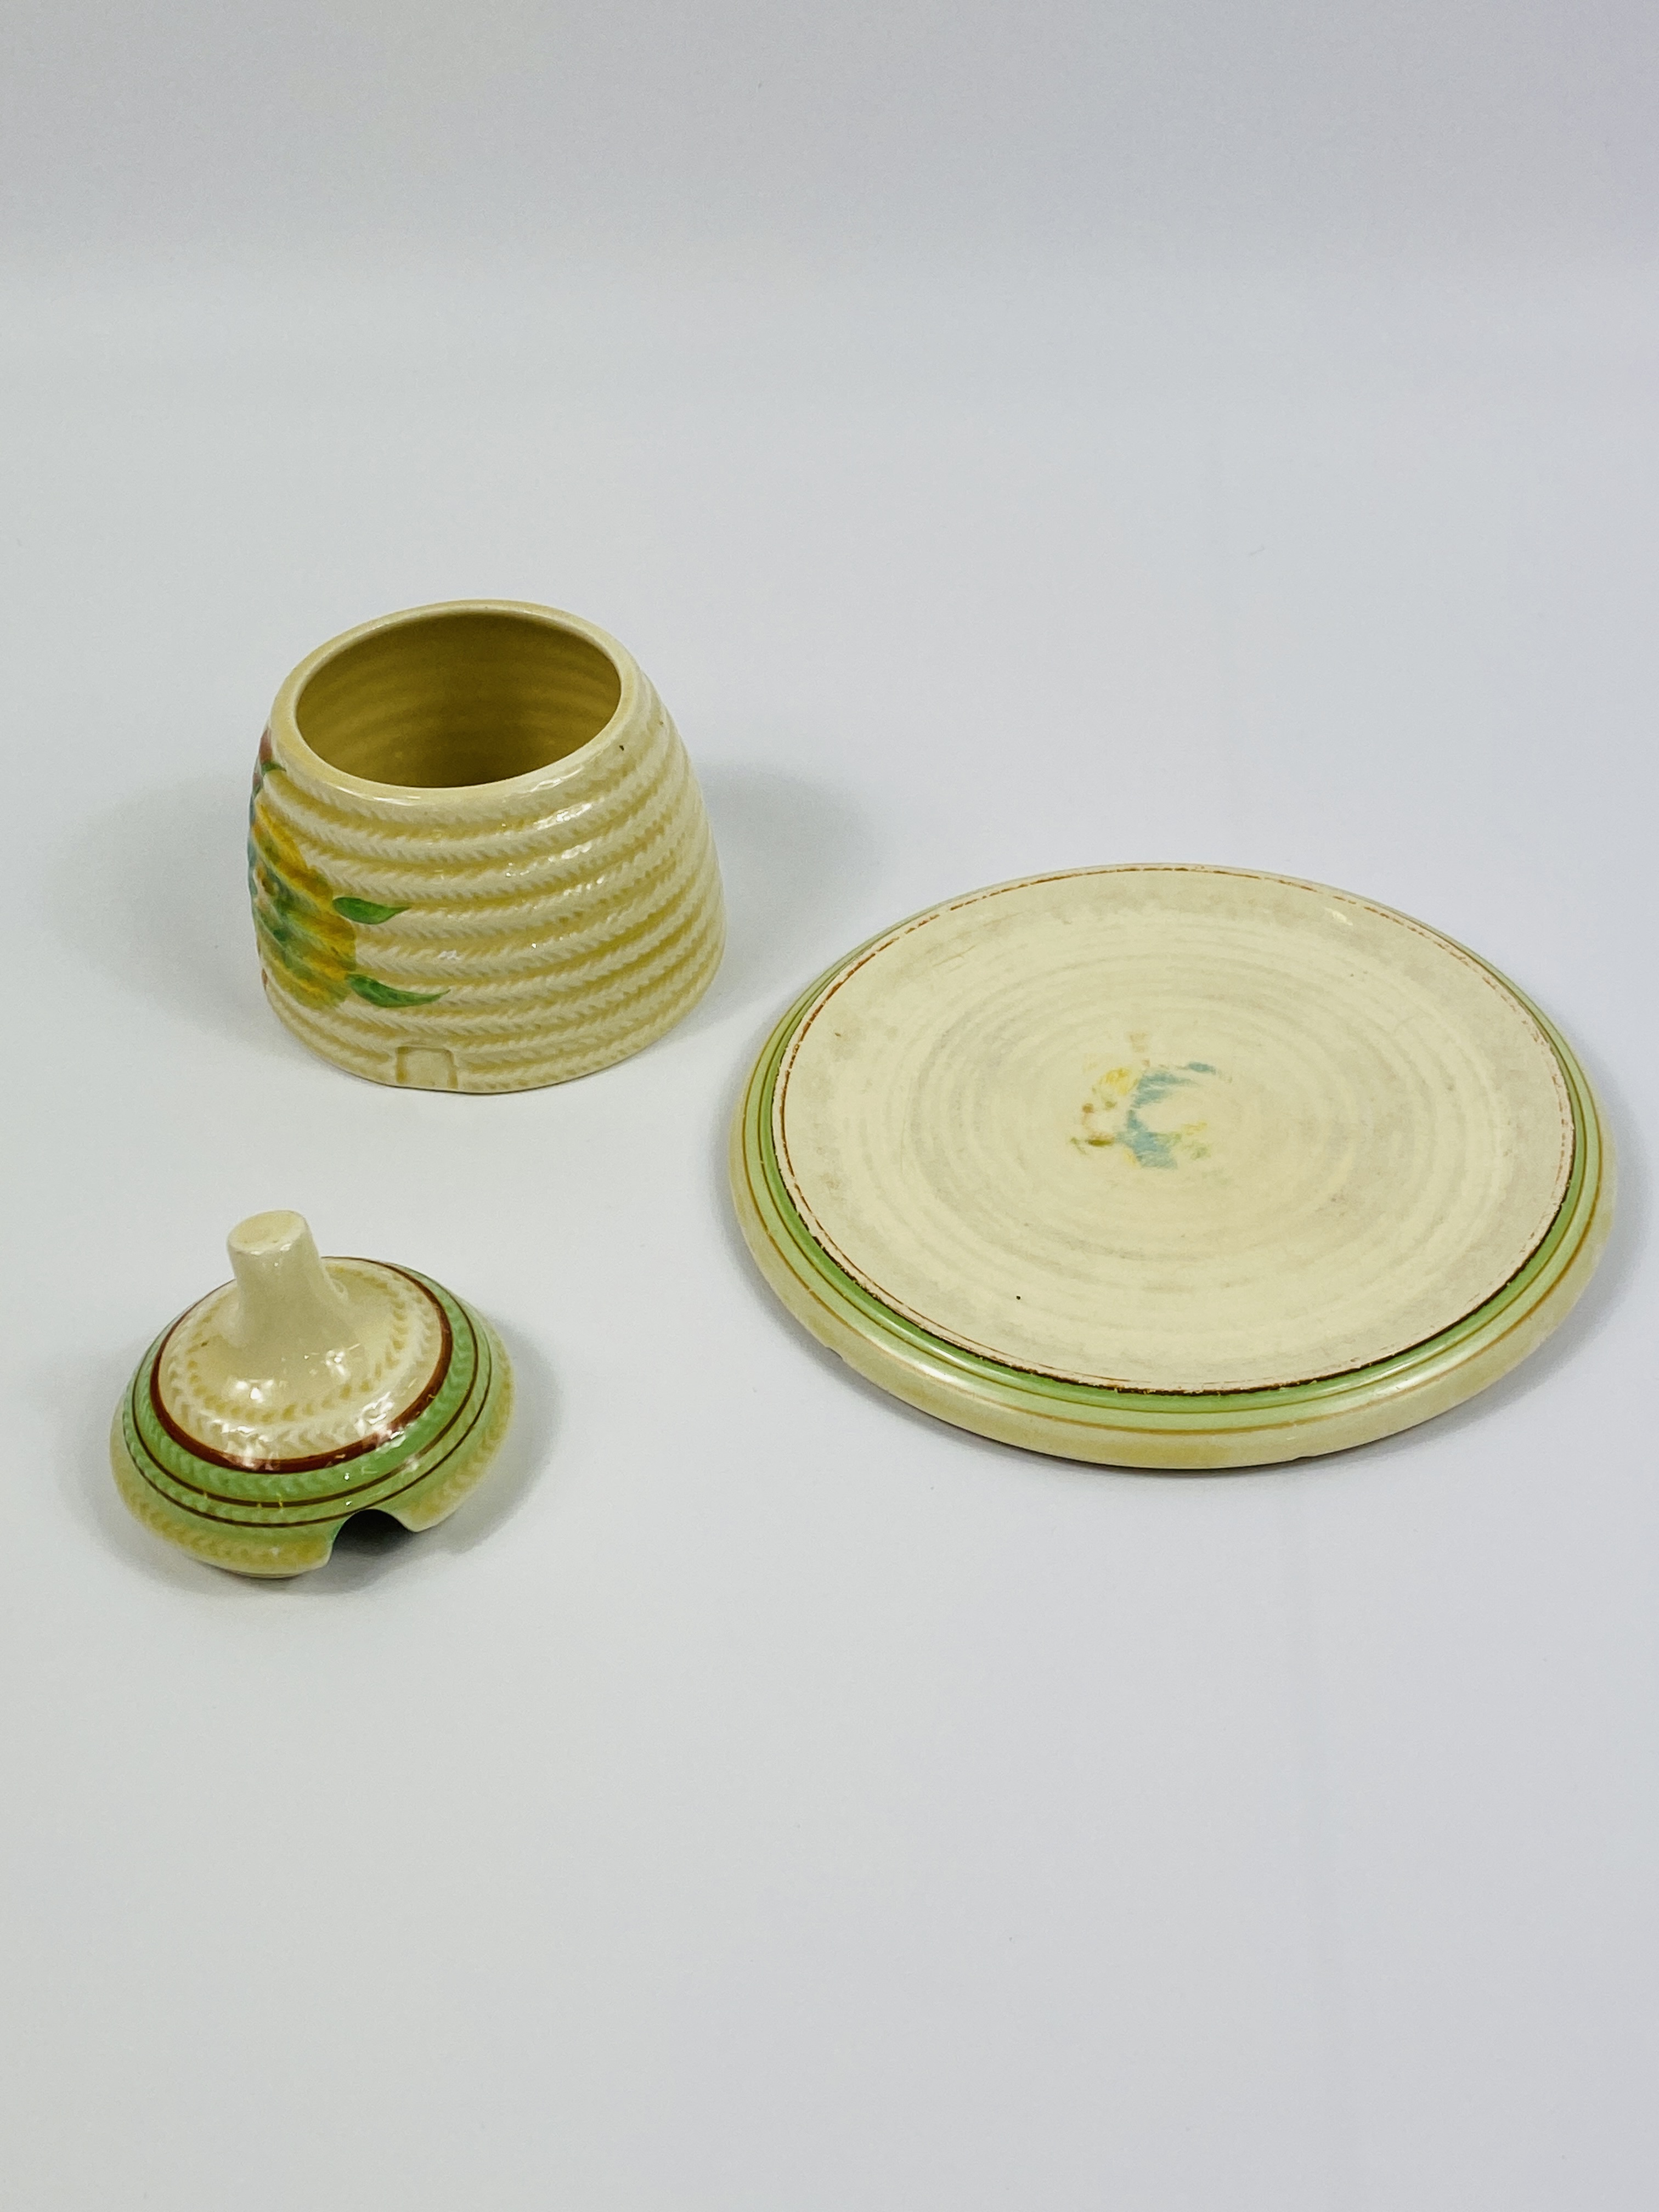 Wilkinson Lts honey pot on Clarice Cliff saucer - Image 3 of 6